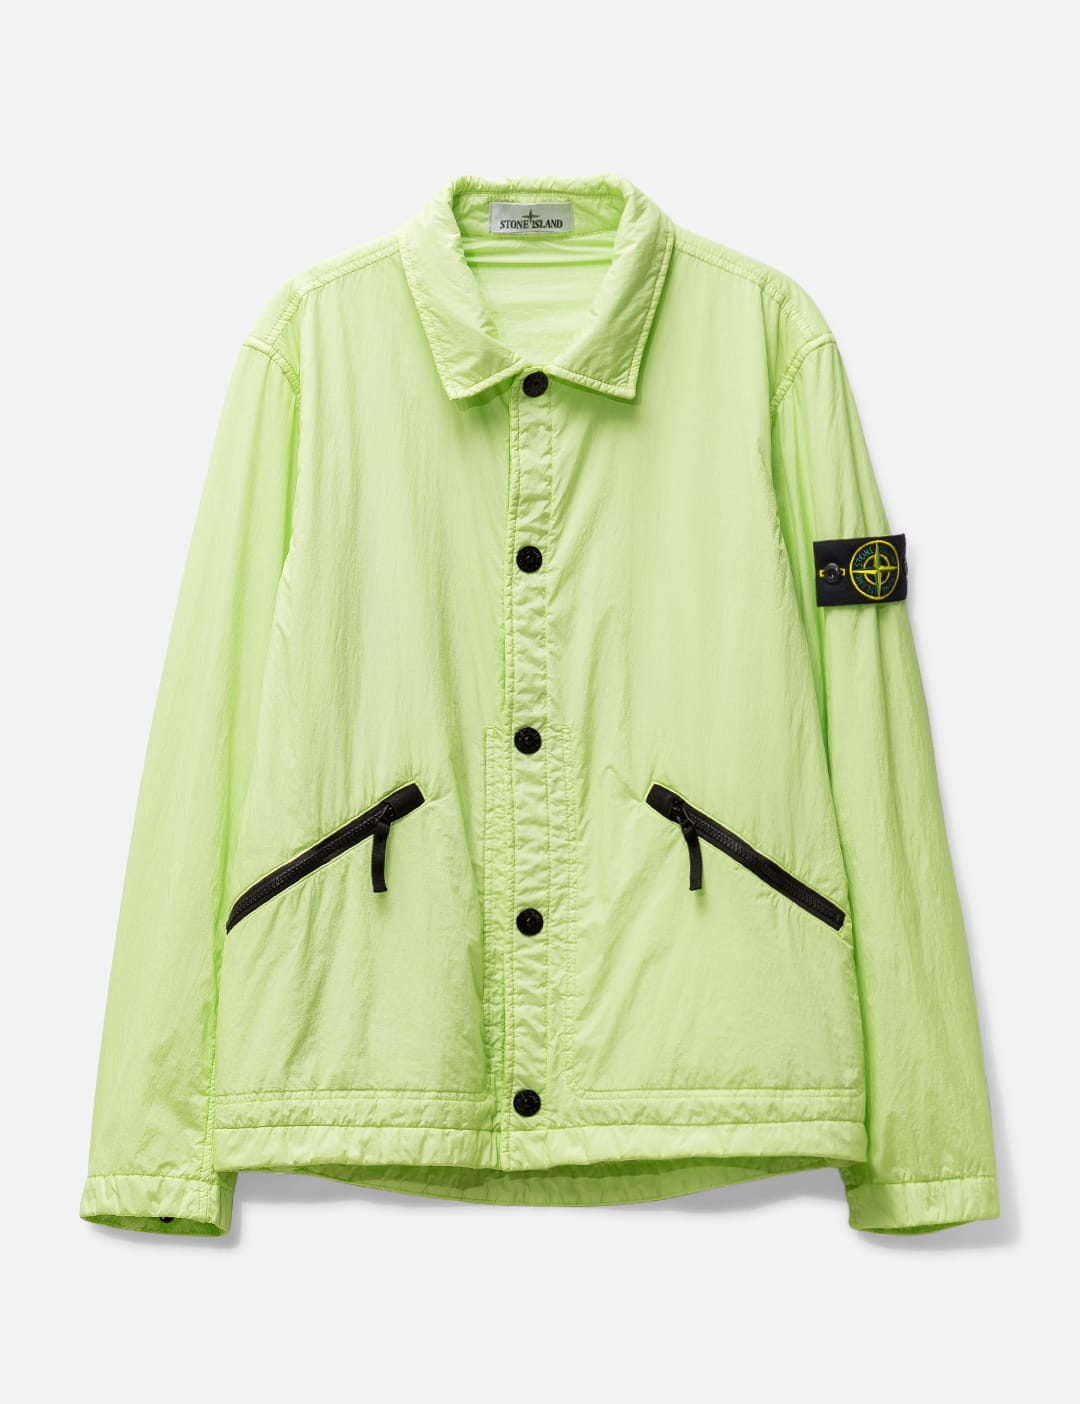 Stone Island 42522 Garment Dyed Crinkle Reps NY With Polartec Alpha Technology